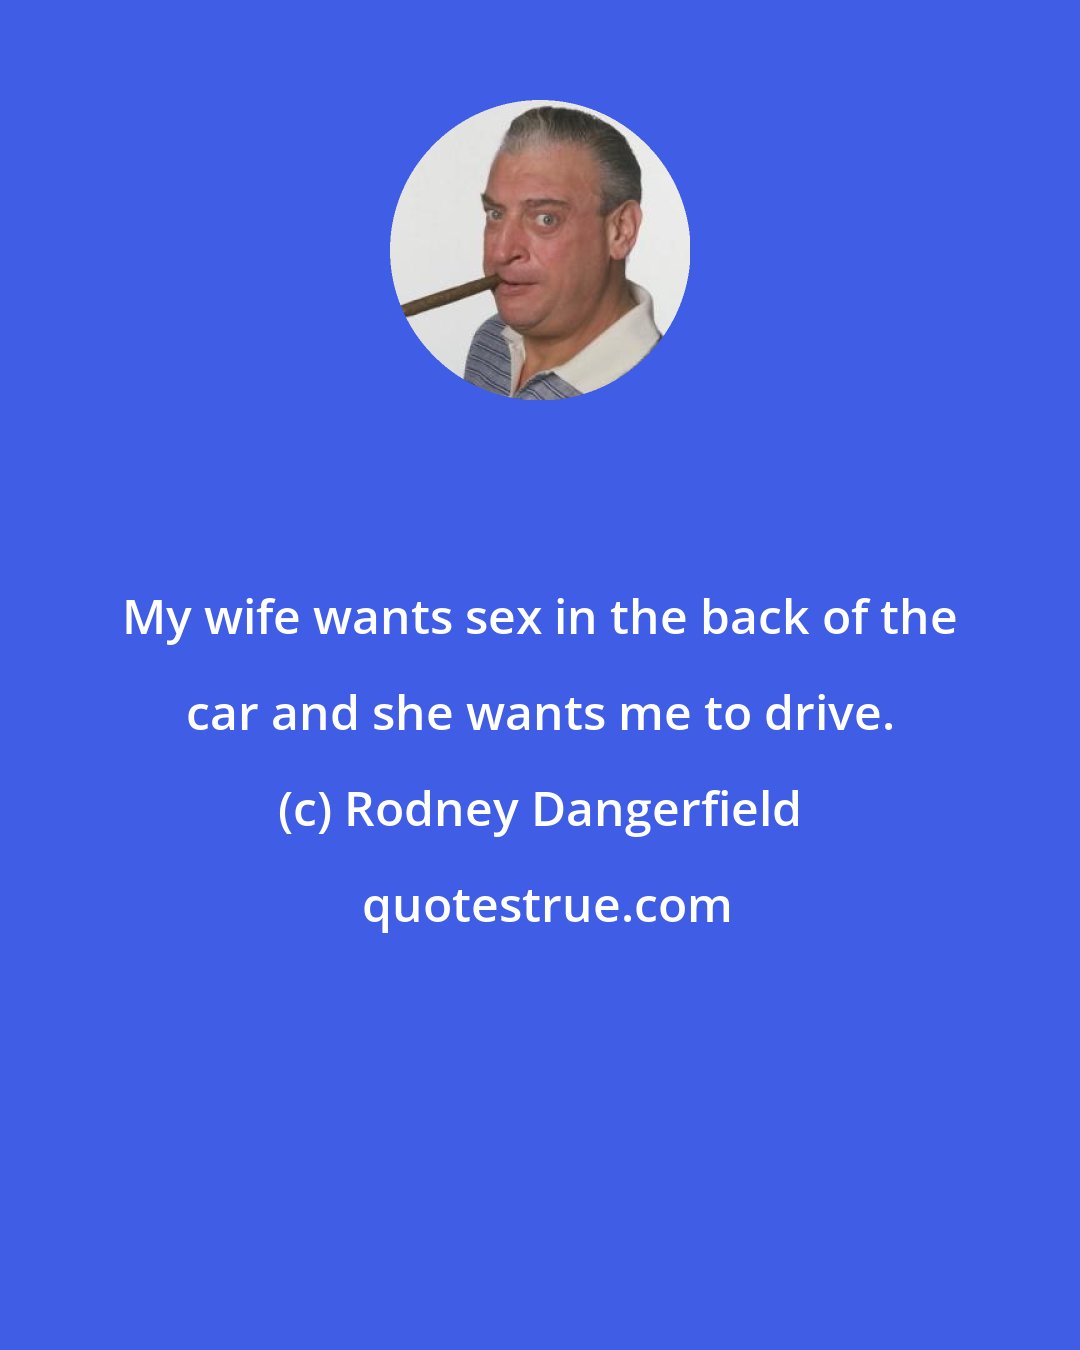 Rodney Dangerfield: My wife wants sex in the back of the car and she wants me to drive.